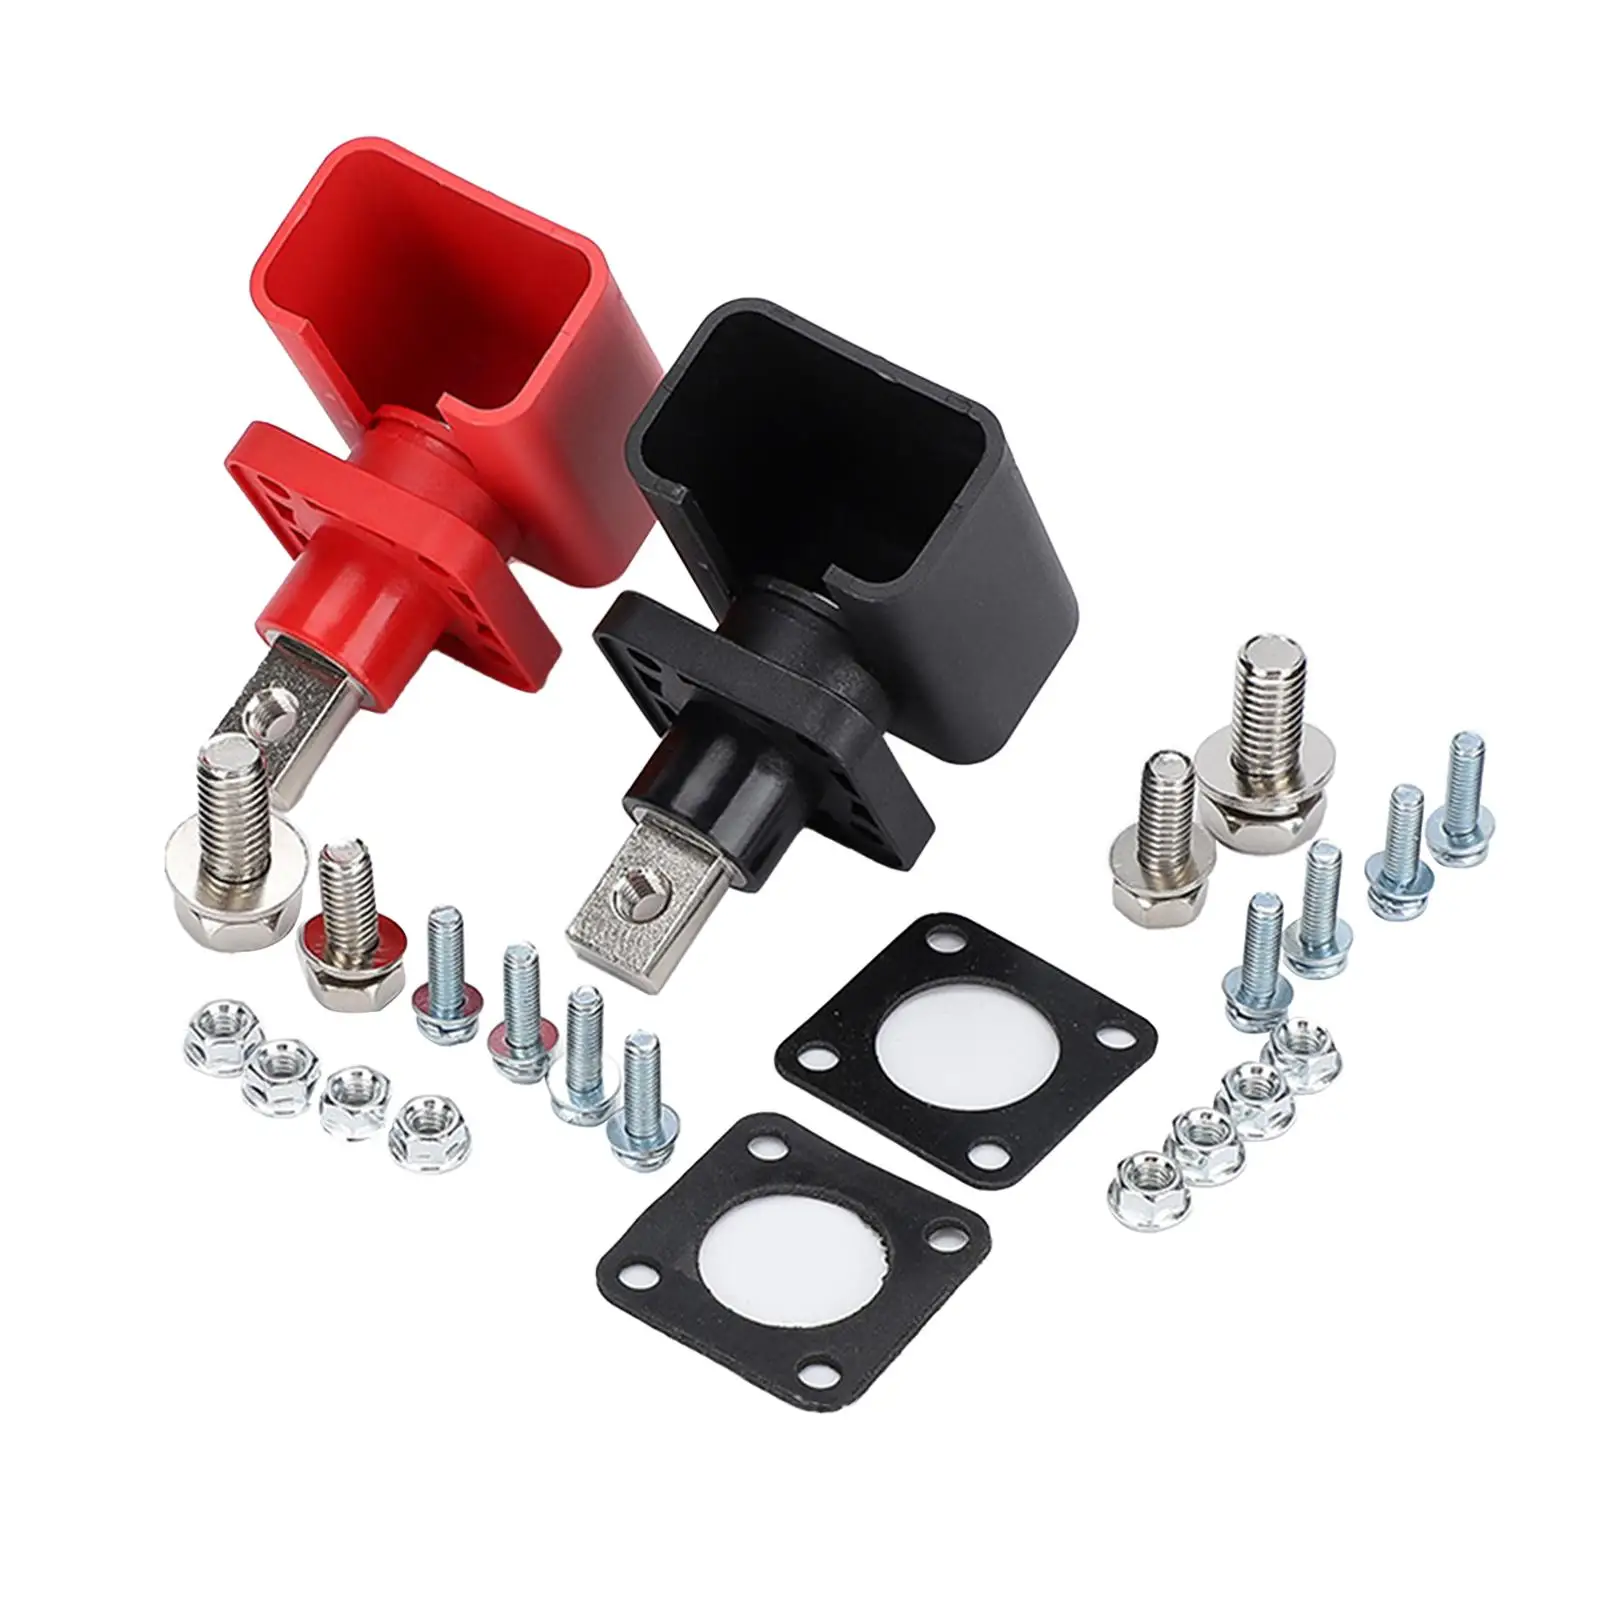 2 Pieces Battery Terminal Connector Compatible Protector Easily Install Quick Disconnect High Current for Truck Boat ATV Car